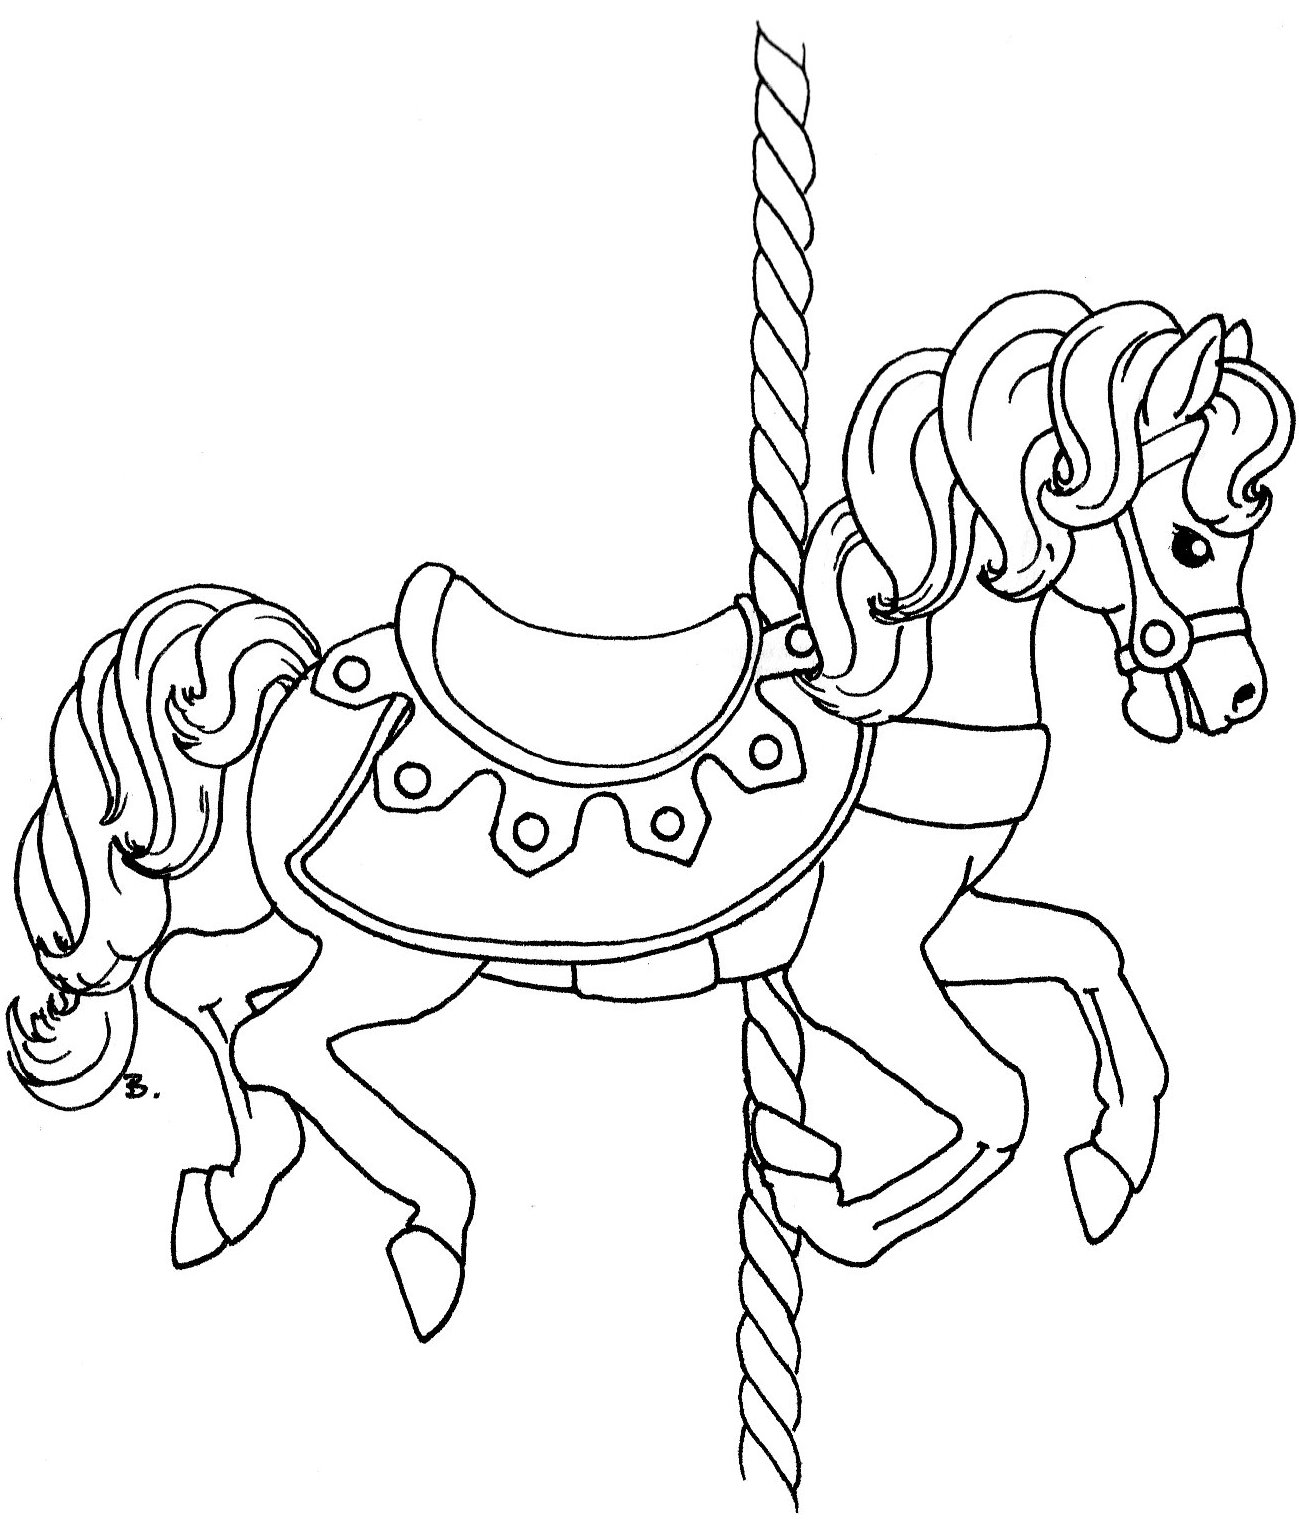 Download Beccy's Place: Carousel Horse With Rug